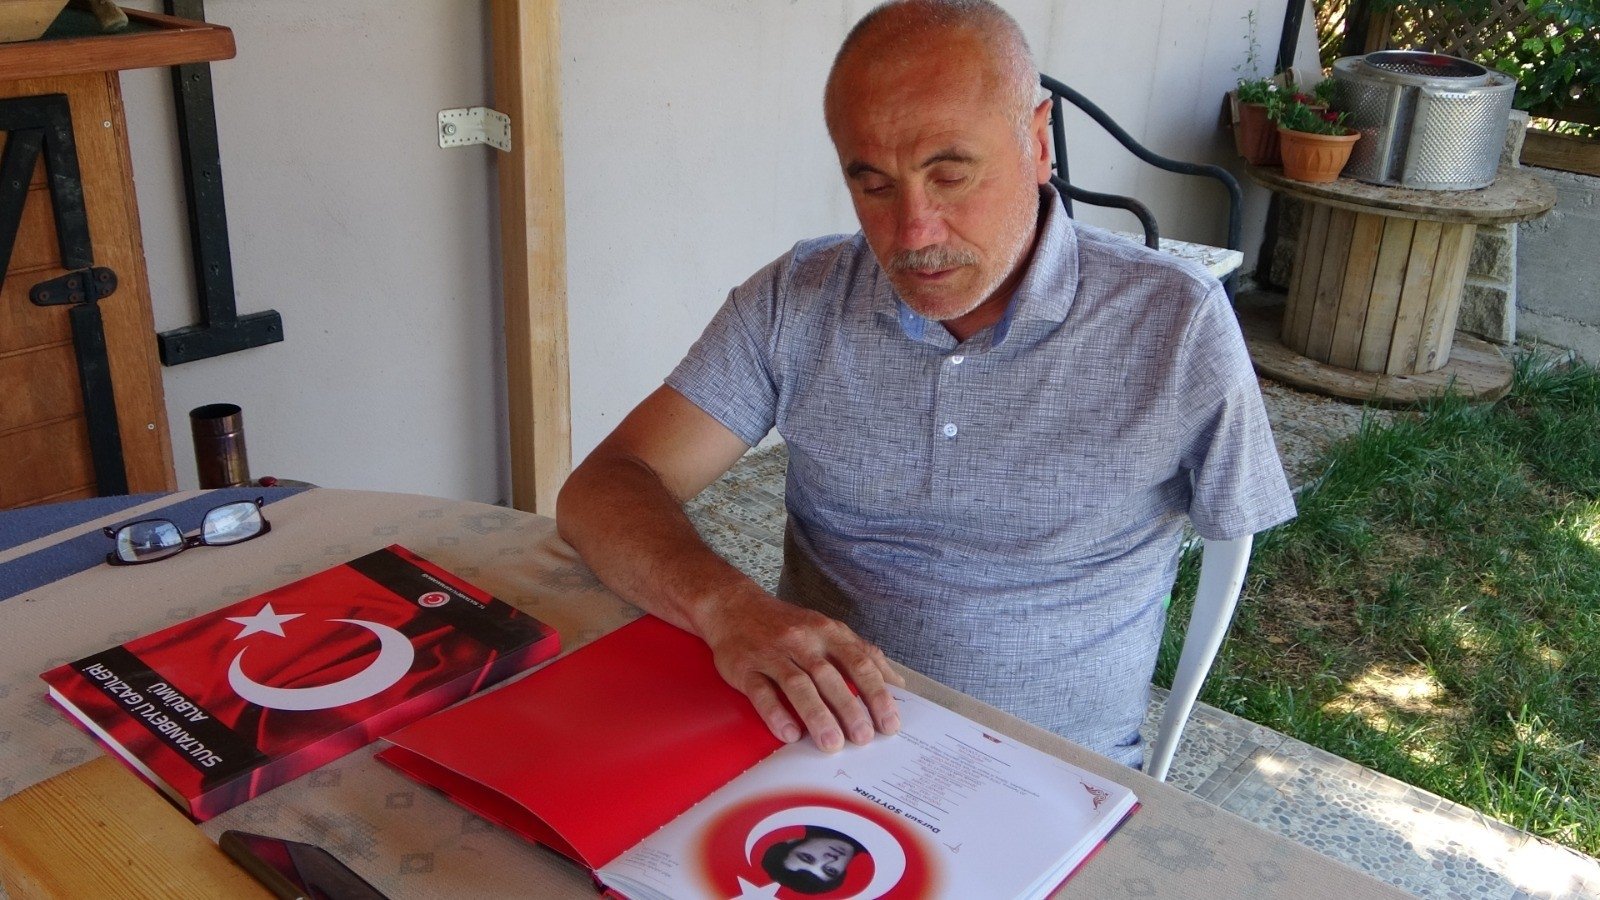 Üzeyir Civan looks at an album about people killed and shot by putschists, in his home, in Istanbul, Türkiye, July 12, 2023. (İHA Photo) 